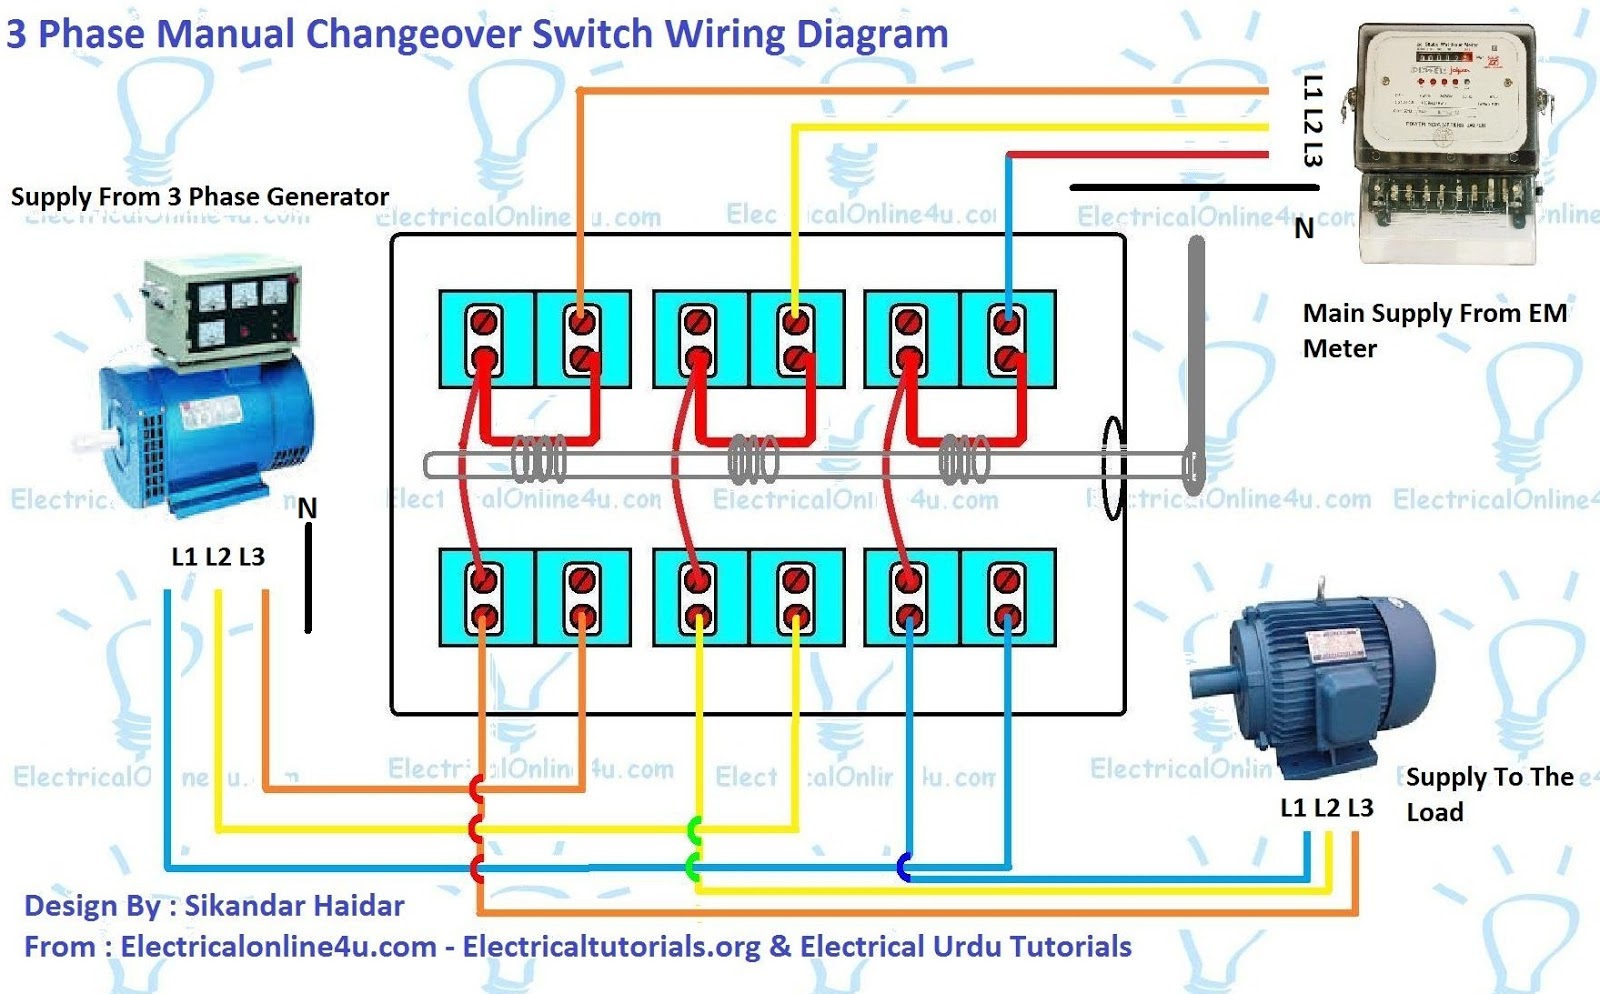 3 Phase Manual Changeover Switch Wiring Diagram For Generator | Electrical Online 4u